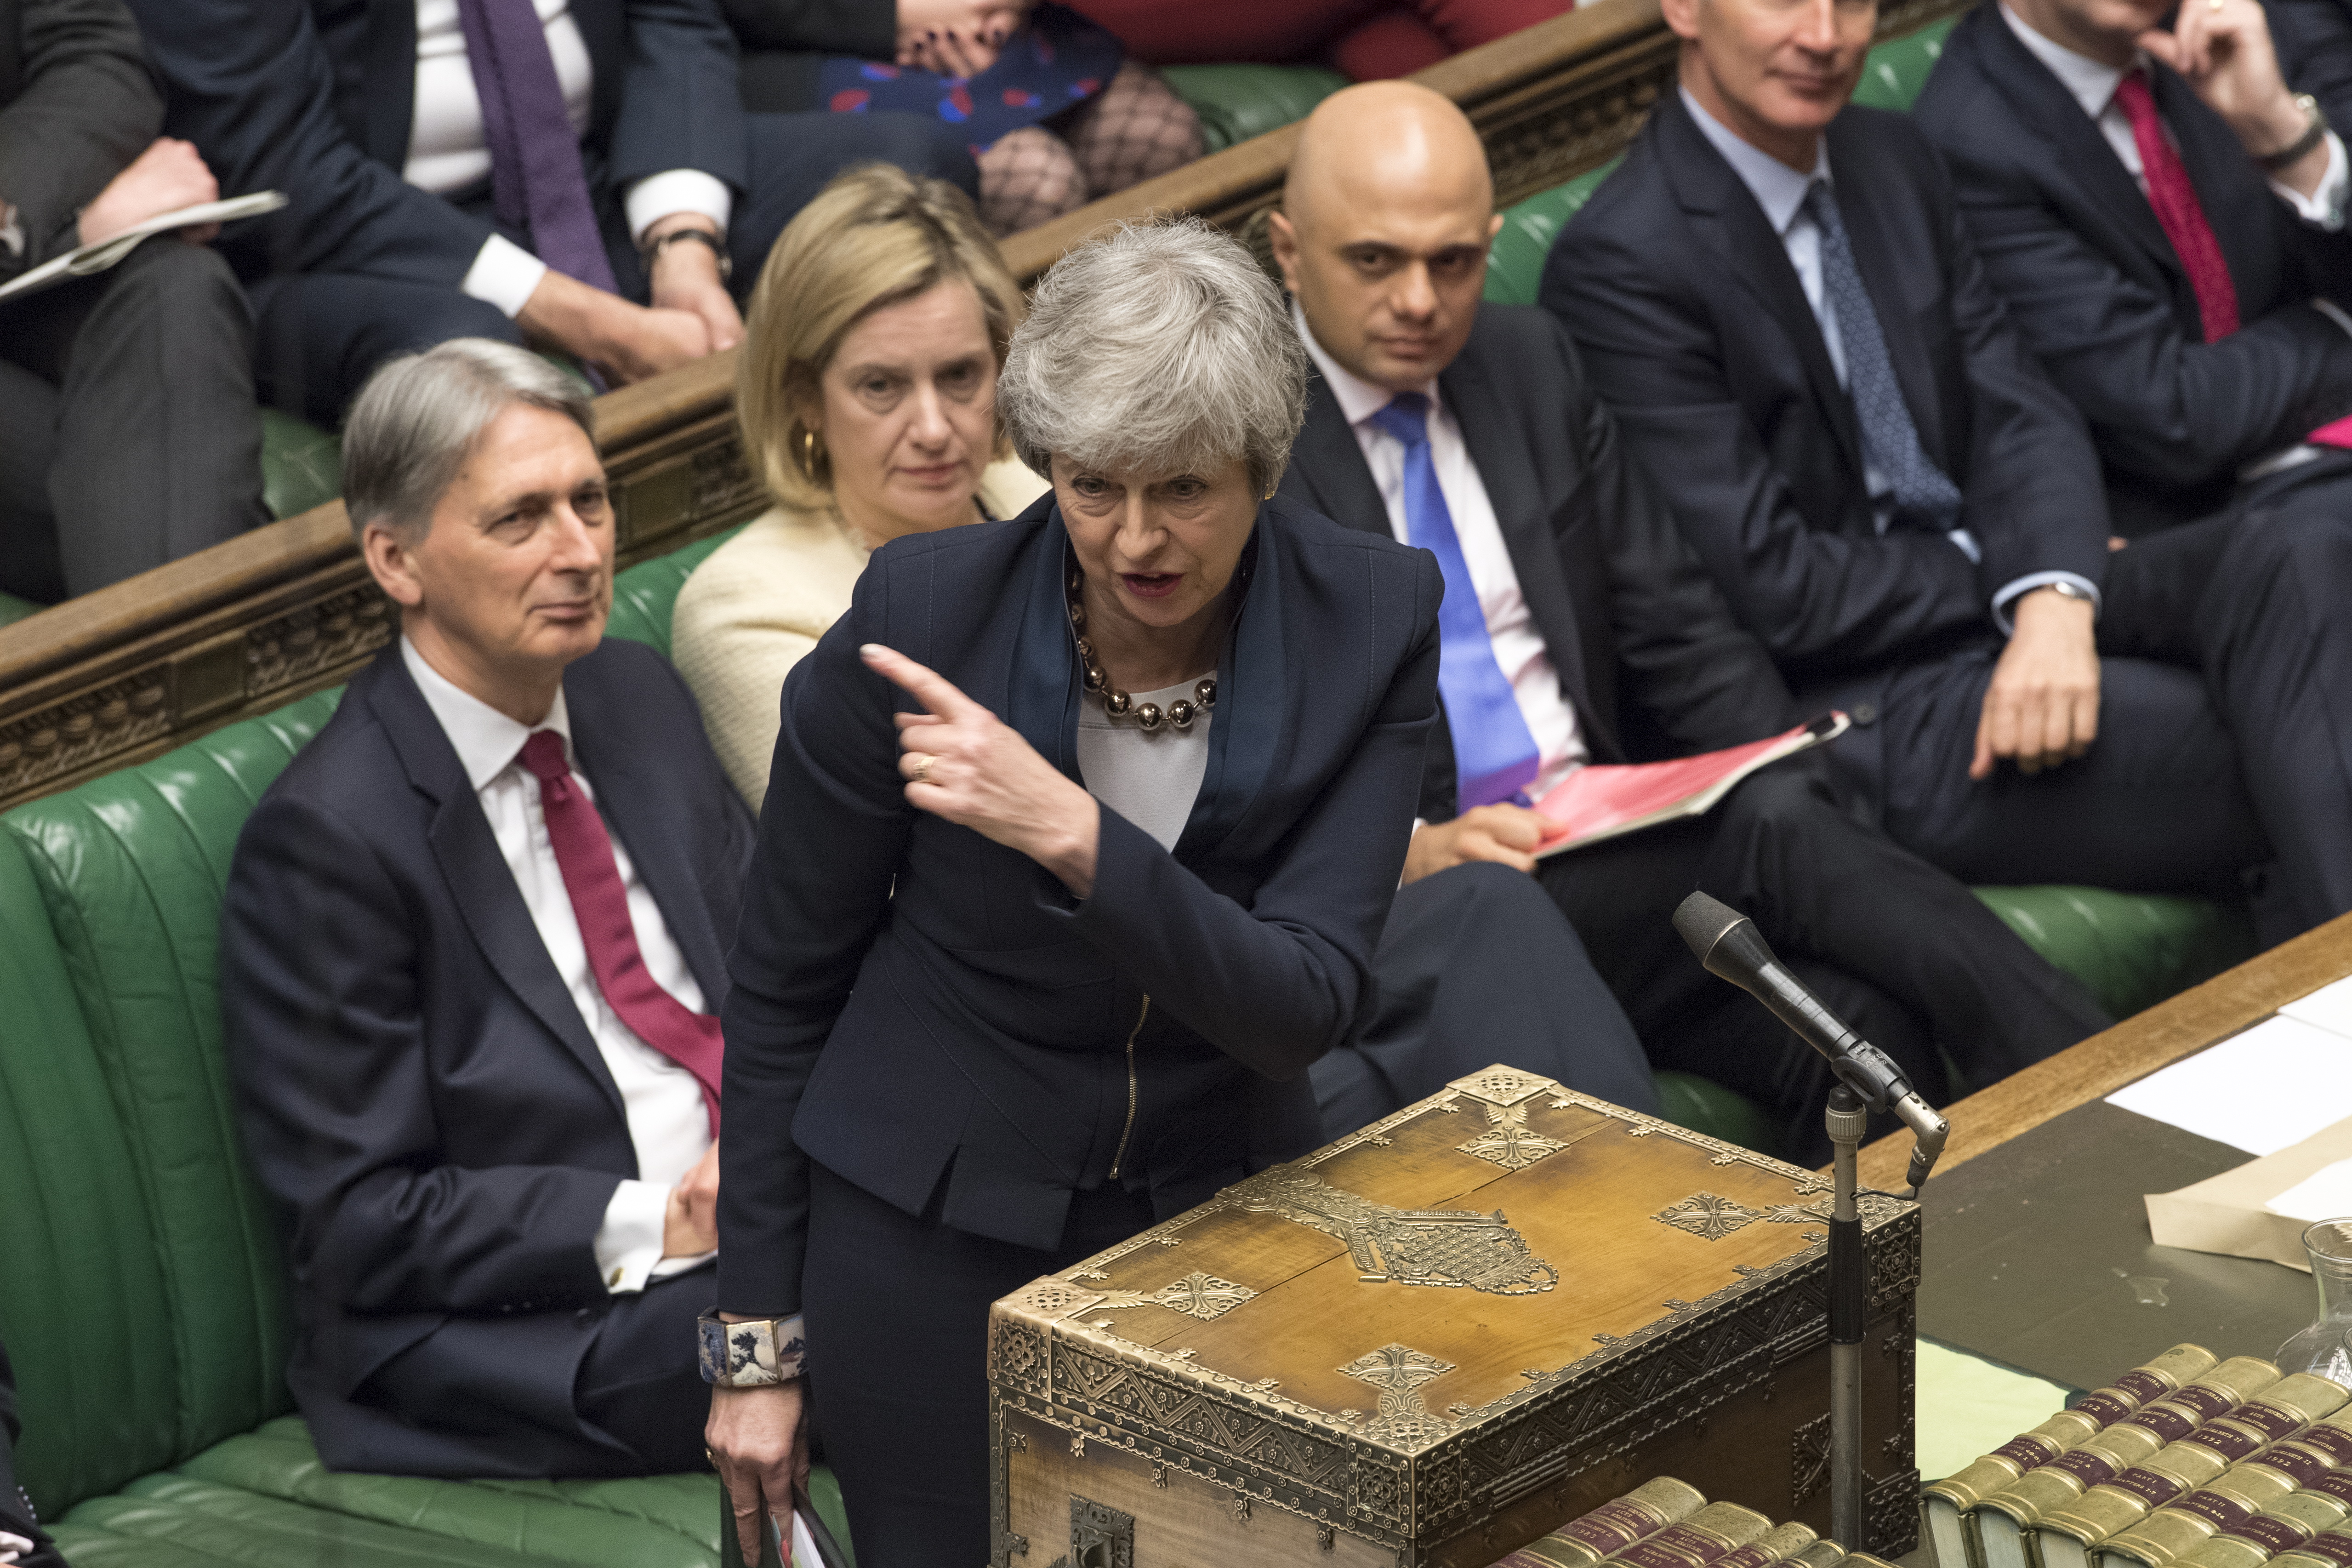 epa07483345 A handout photo made available by the UK Parliament shows British Prime Minister Theresa May (3-L) speaks during a Prime Ministers Questions (PMQs) in the British House of Commons in London, Britain, 03 April 2019. PM Theresa May will meet Corbyn tomorrow to see whether there is common ground to break the Brexit deadlock.  EPA/MARK DUFFY / UK PARLIAMENT / HANDOUT MANDATORY CREDIT: UK PARLIAMENT MARK DUFFY HANDOUT EDITORIAL USE ONLY/NO SALES